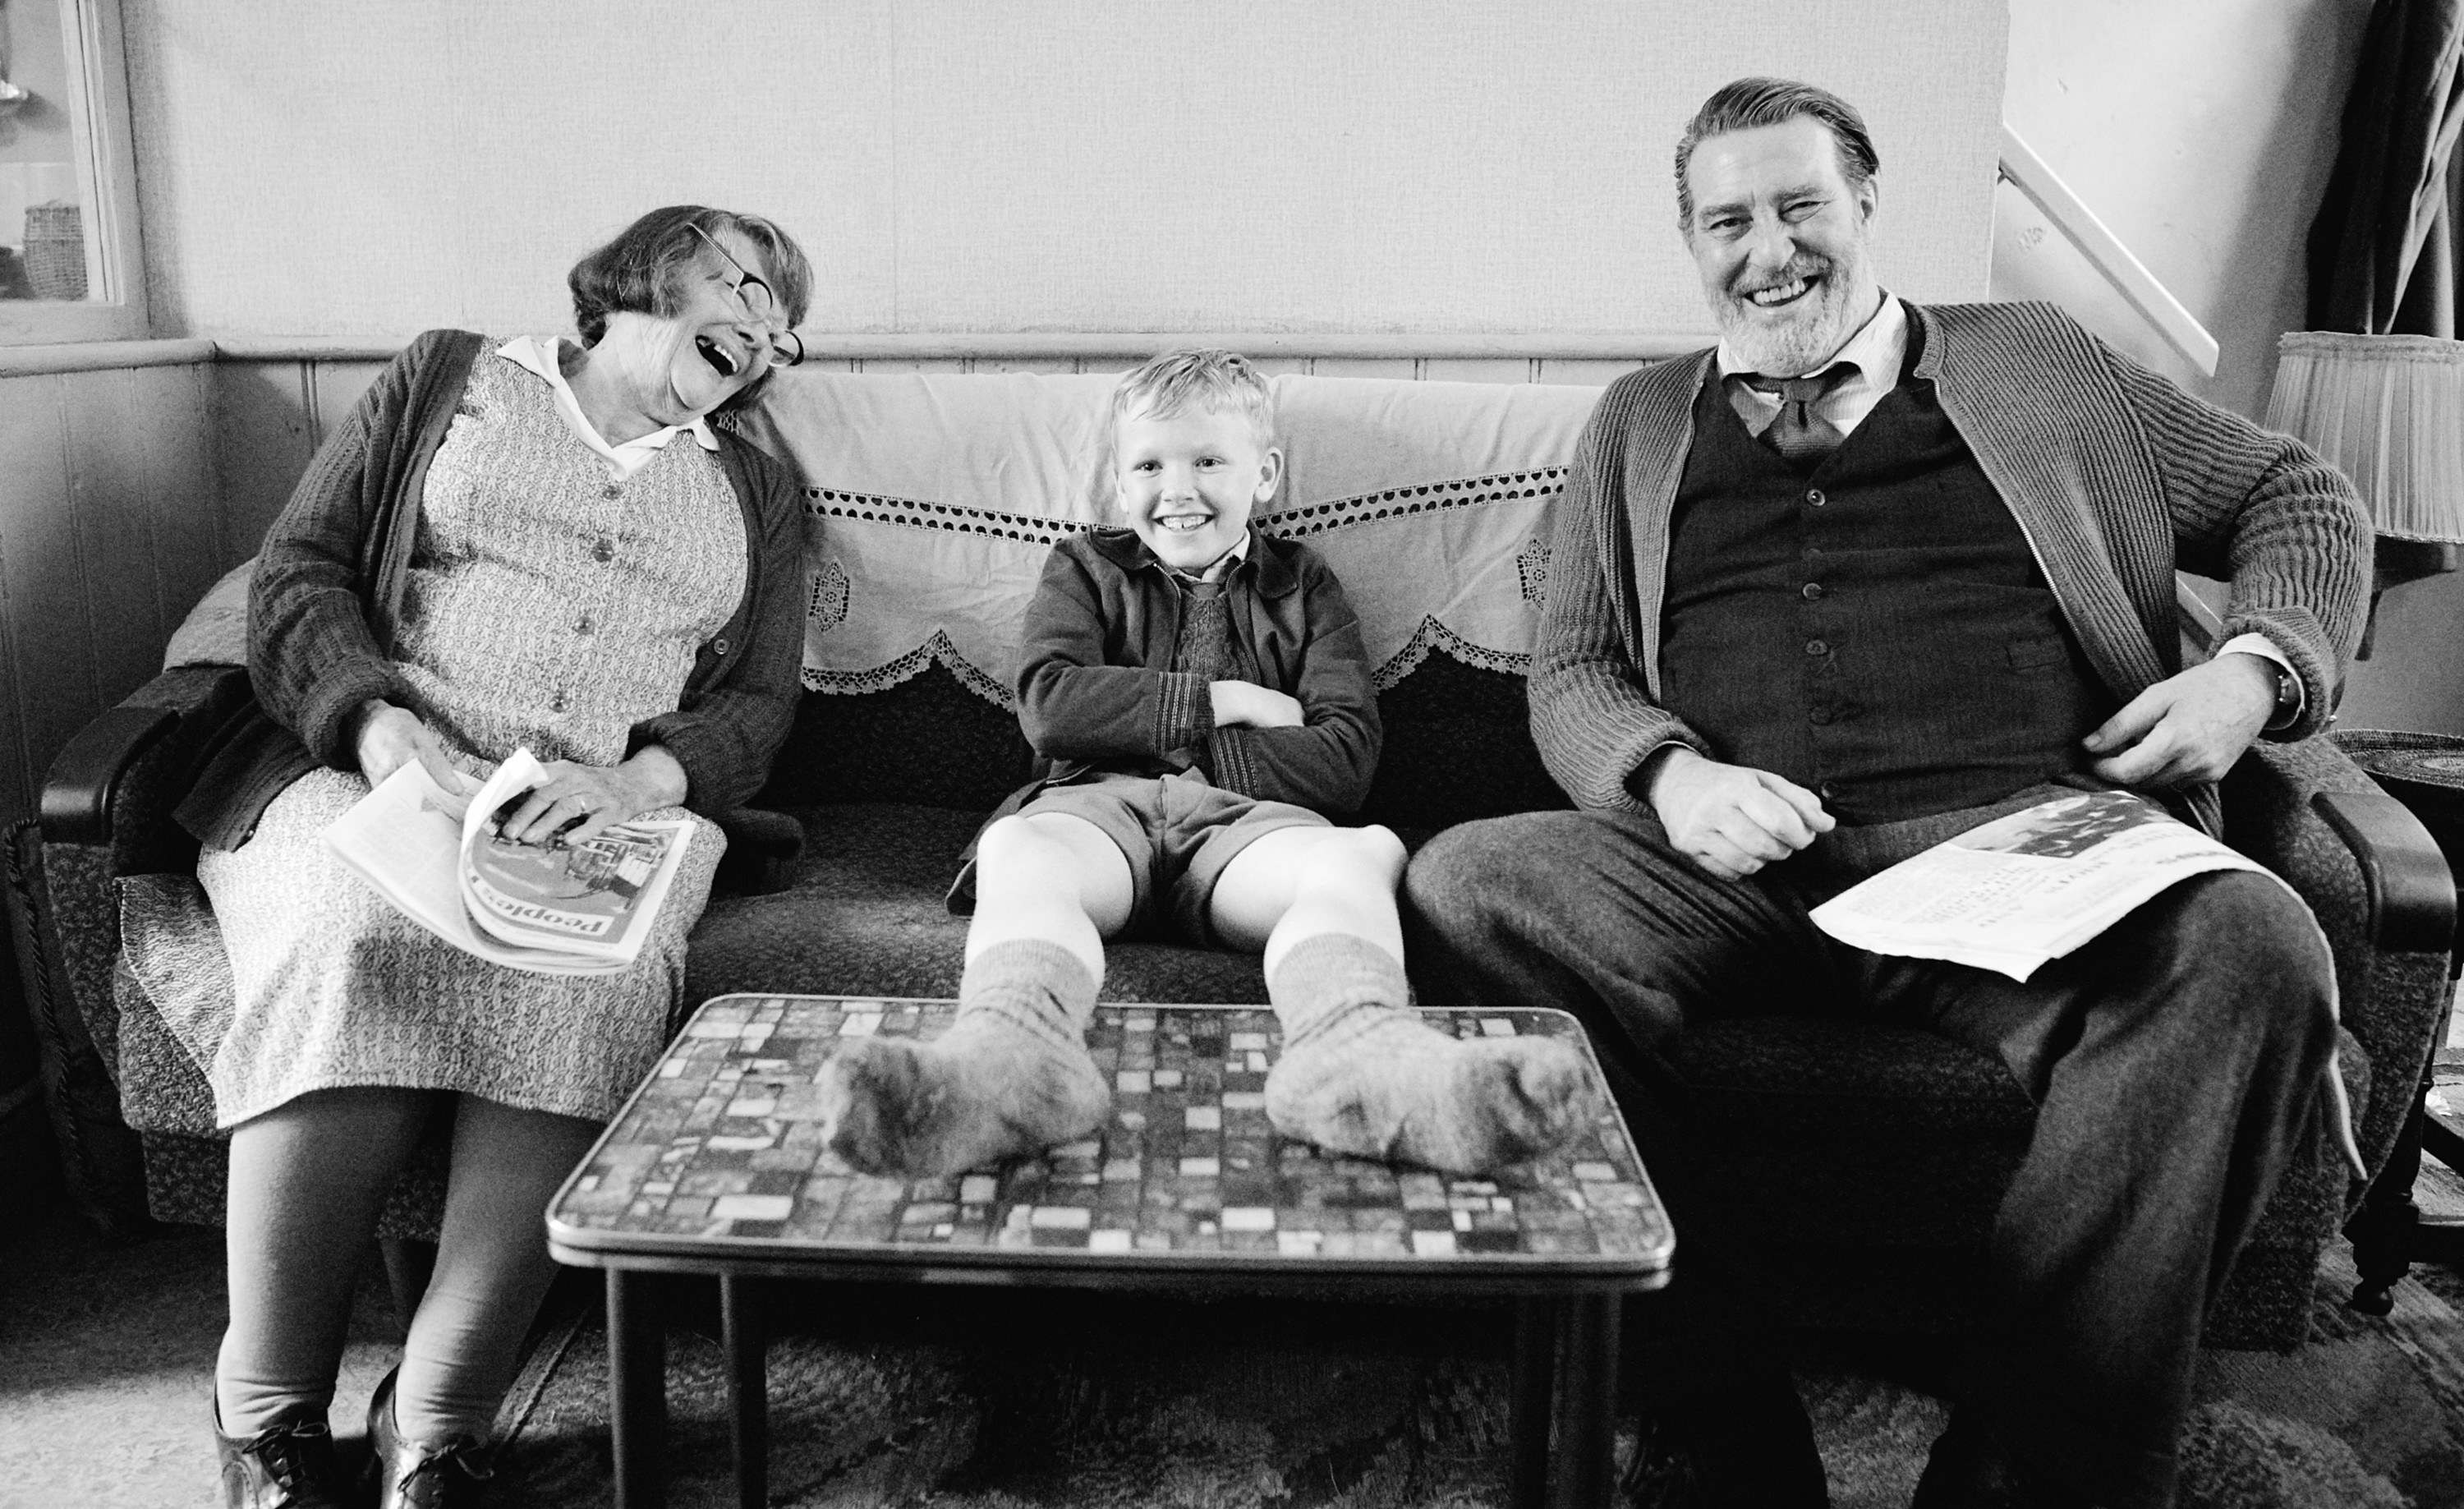 Judi Dench, Jude Hill, and Ciaran Hinds laugh on a couch